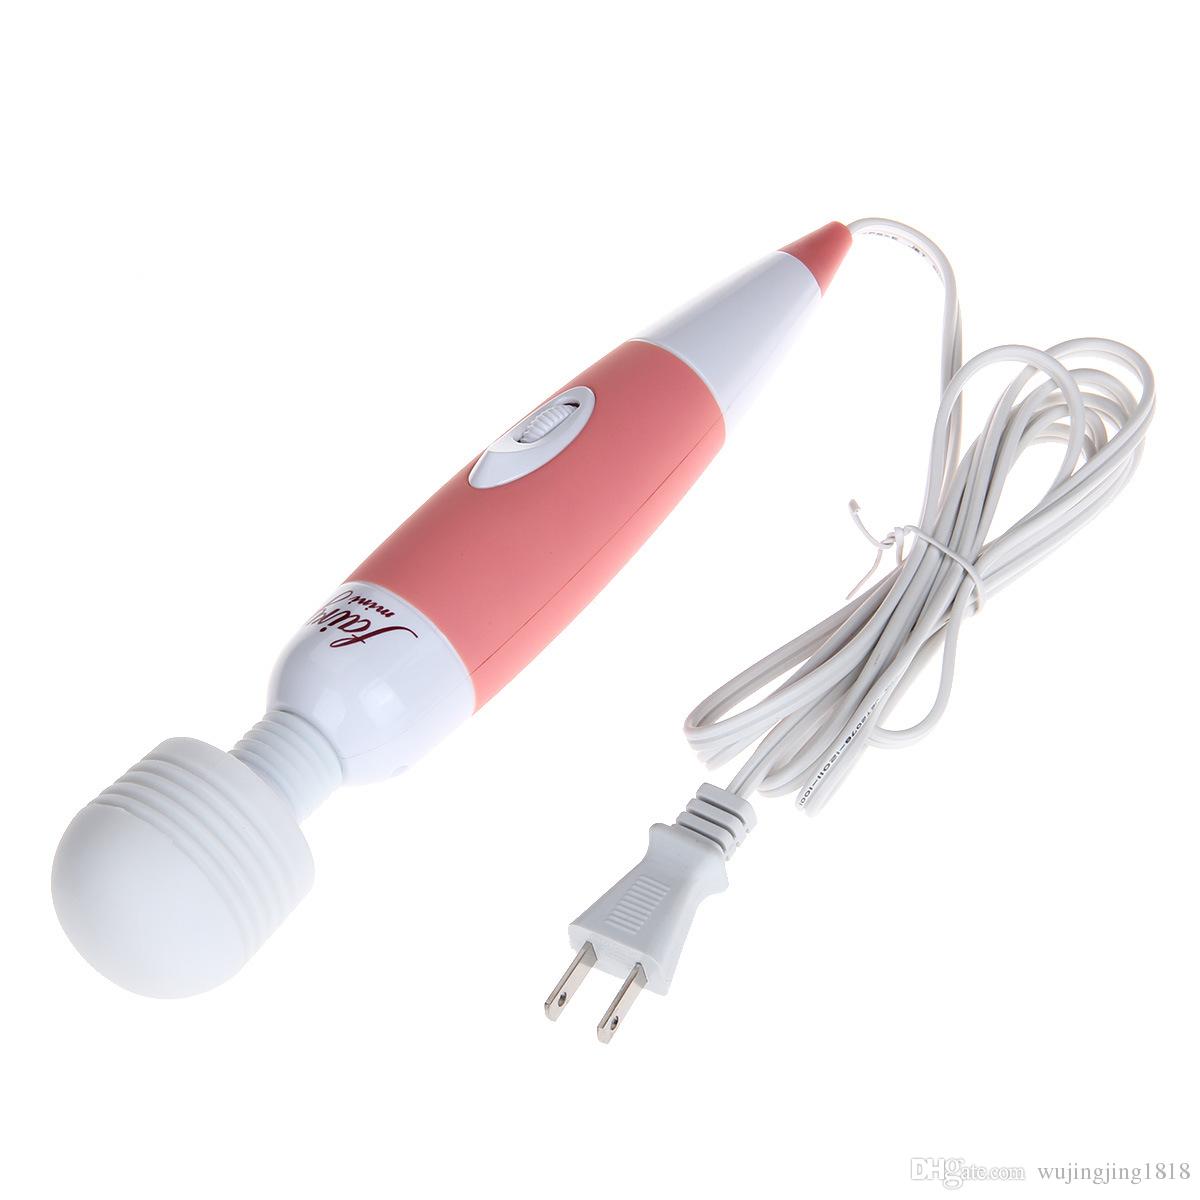 Moonflower reccomend electrical vibrator Female